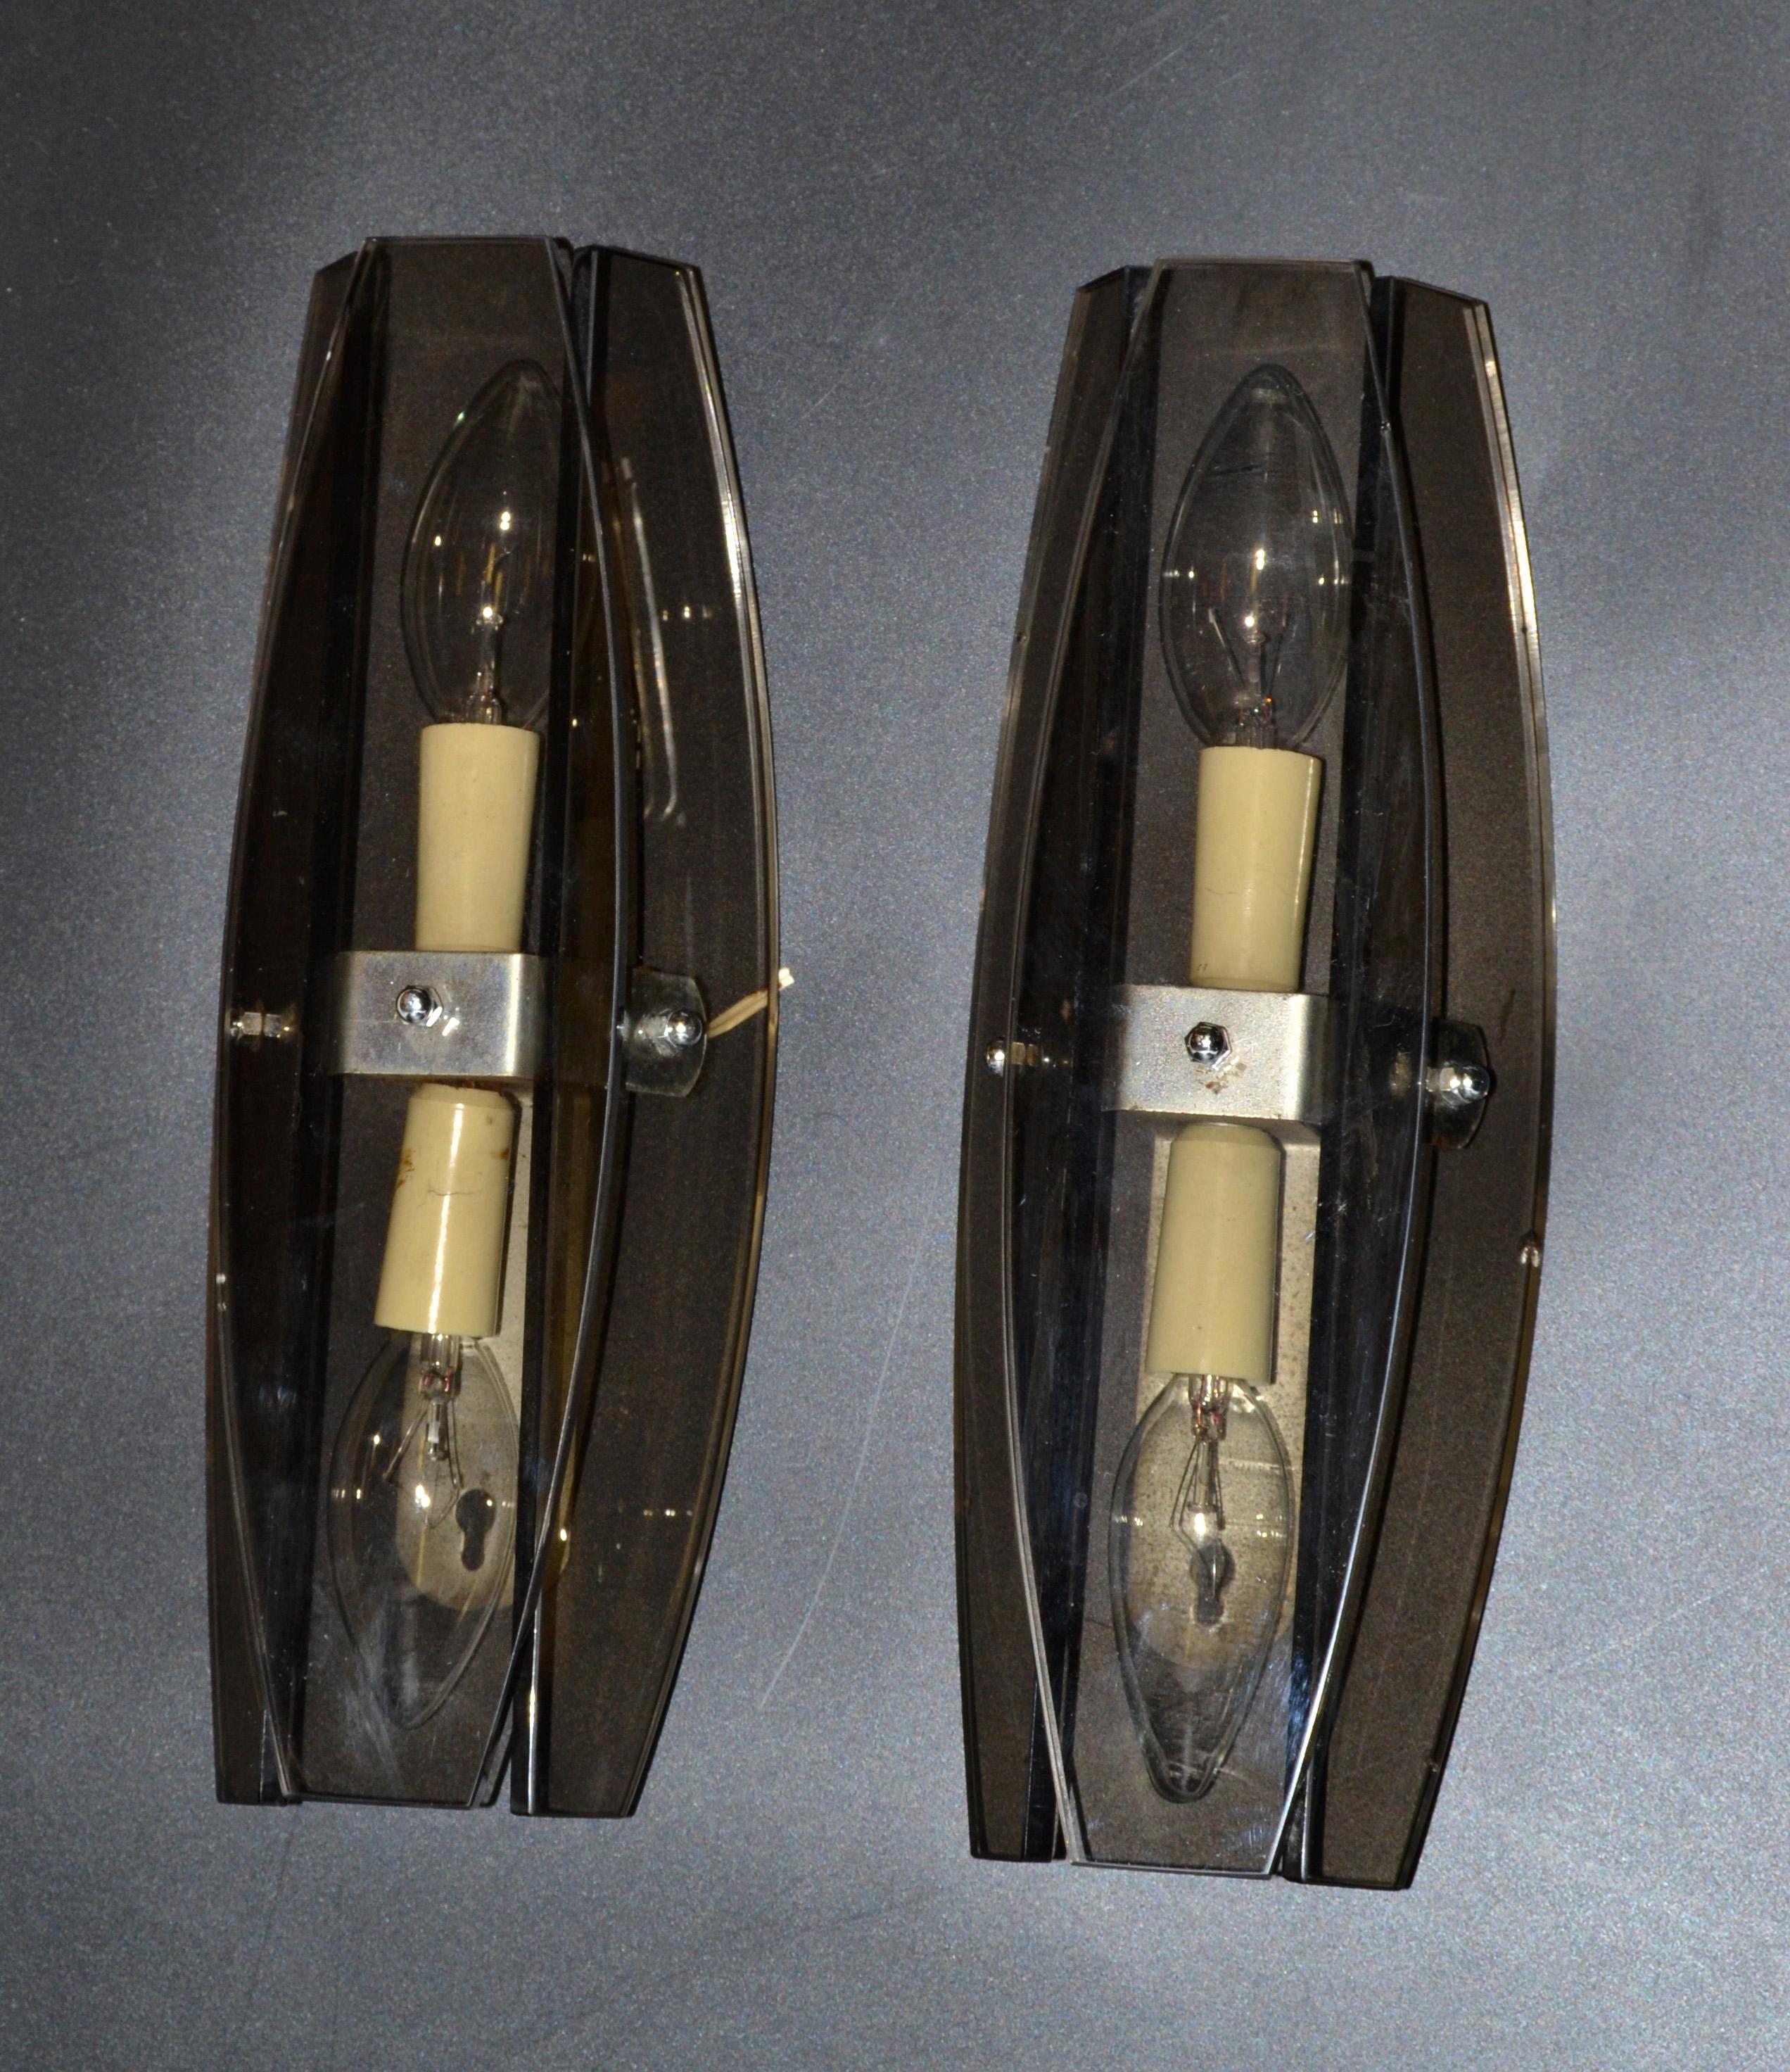 Vintage Fontana Arte Style Sconces, Wall Lights, Italy, 1970, Pair For Sale 2